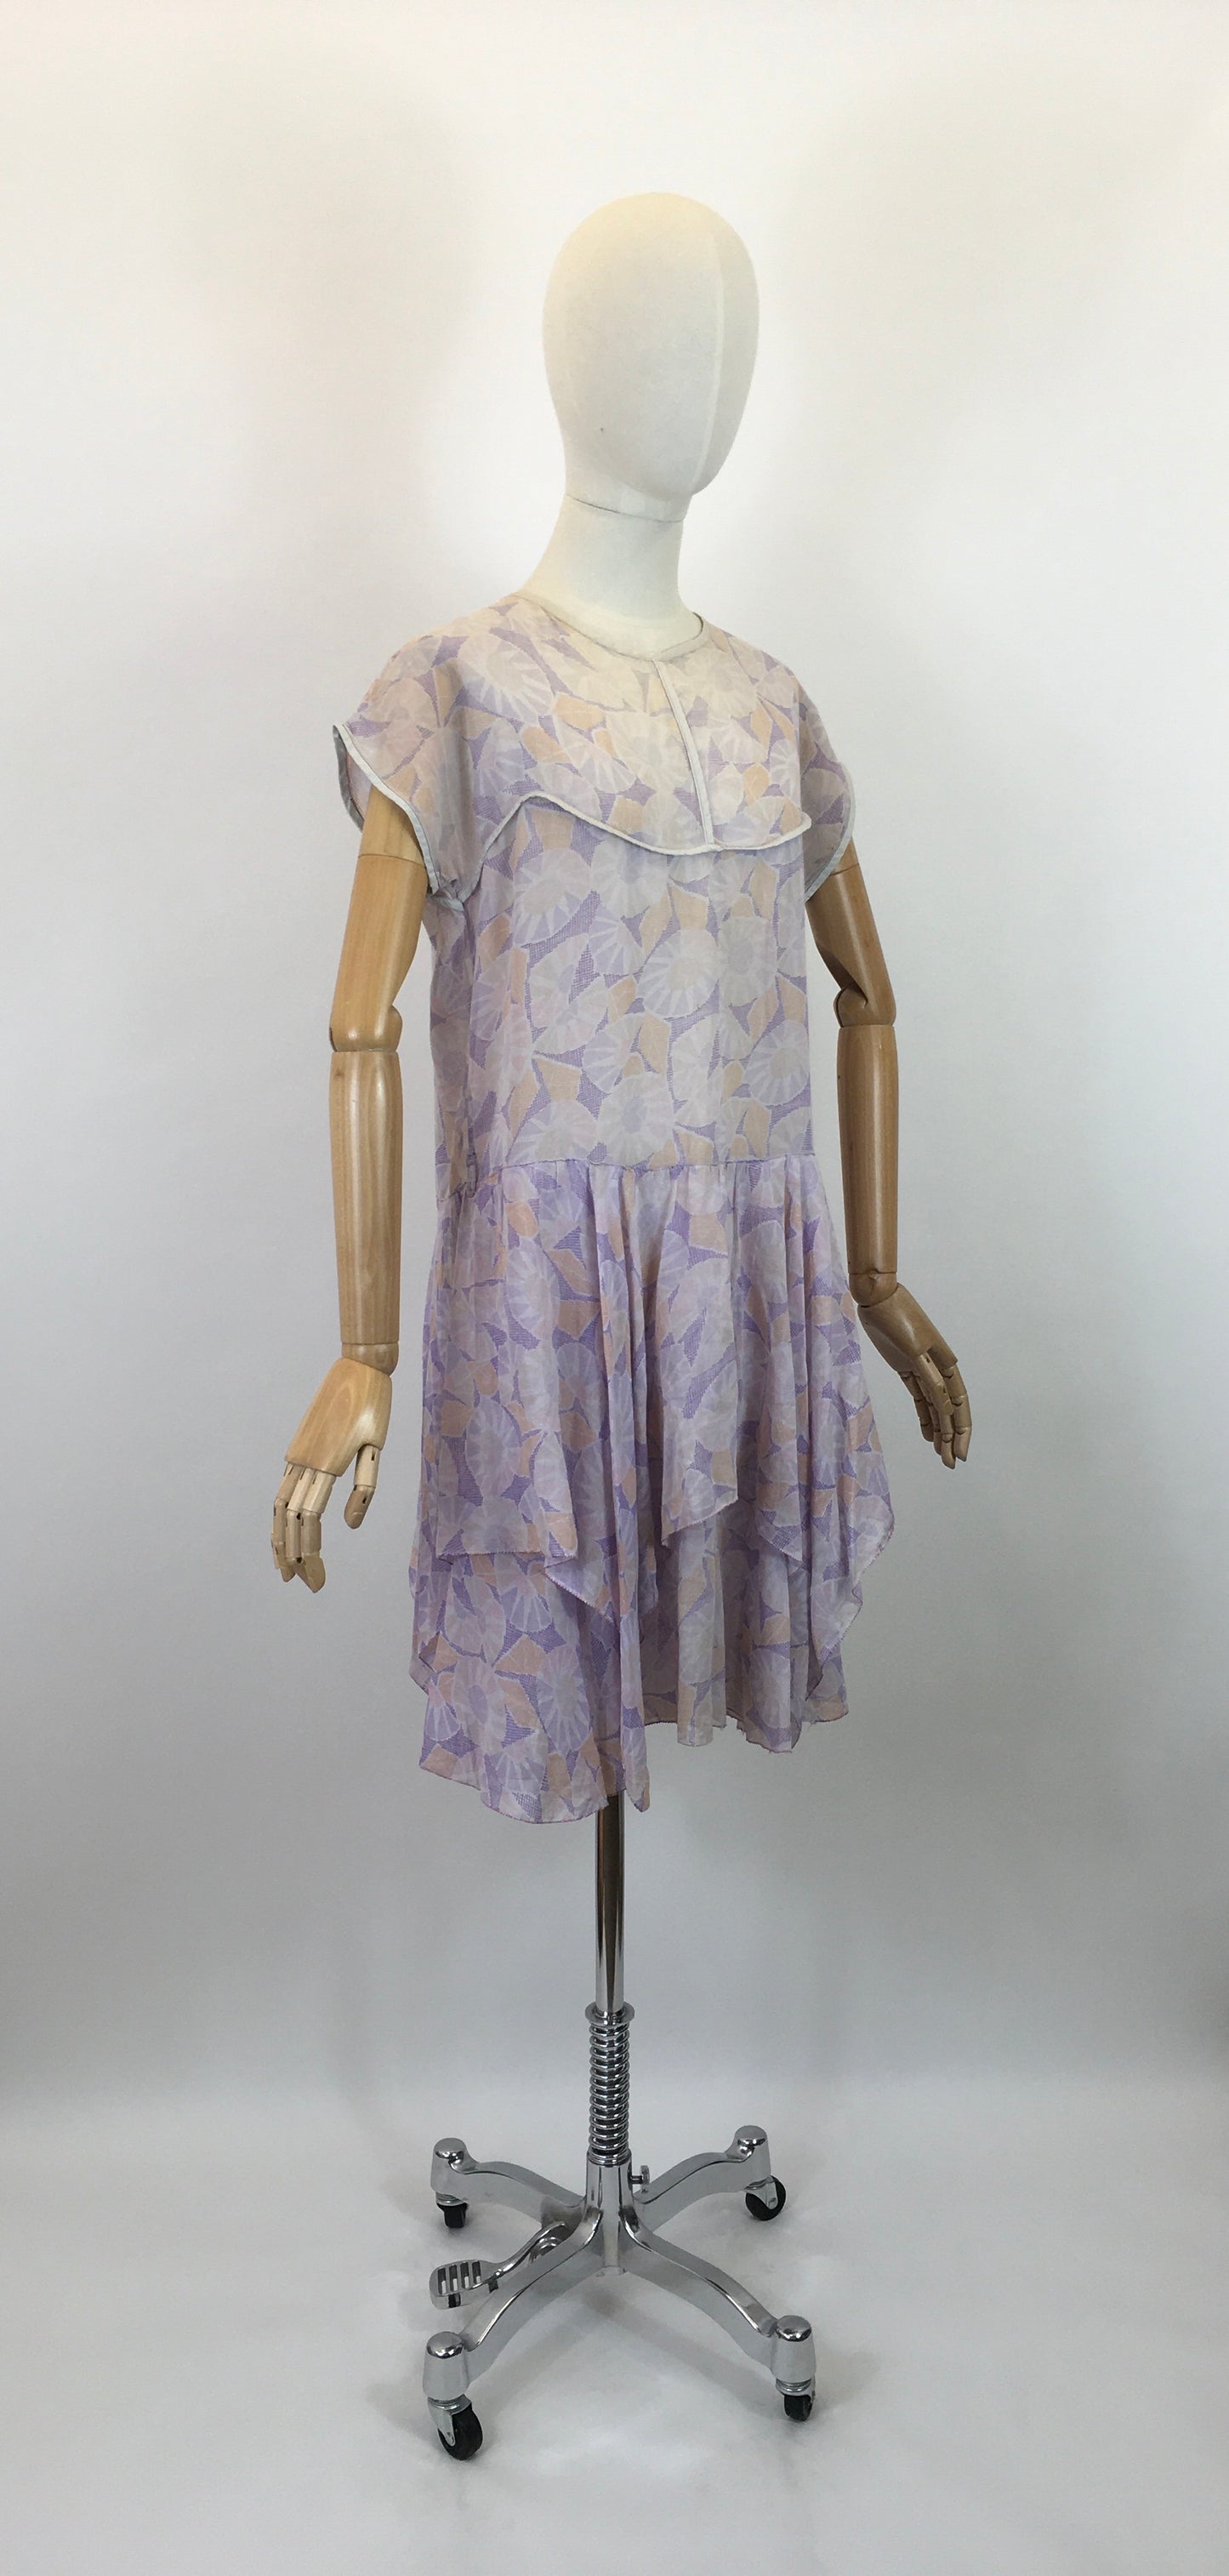 Original 1920's Charming Cotton Lawn Day Dress - In Deco Pastels of Lilacs, Pinks & Orange